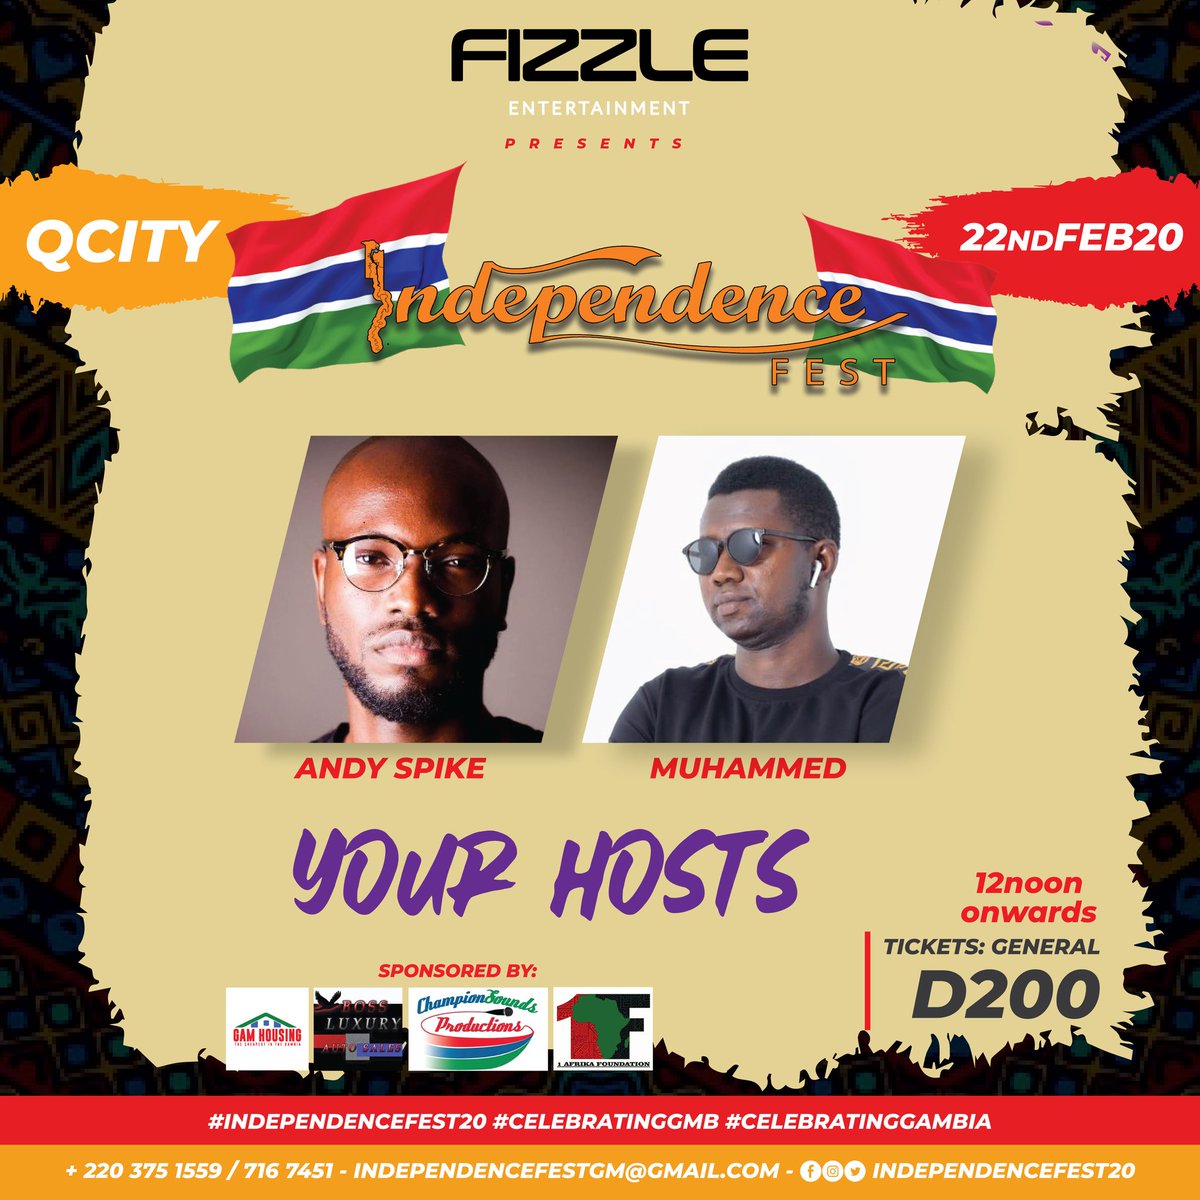 IndependenceFest going down today at the Qcity Complex
Let's turn up 🇬🇲❤️🎶🕺💃
#FizzleEnt